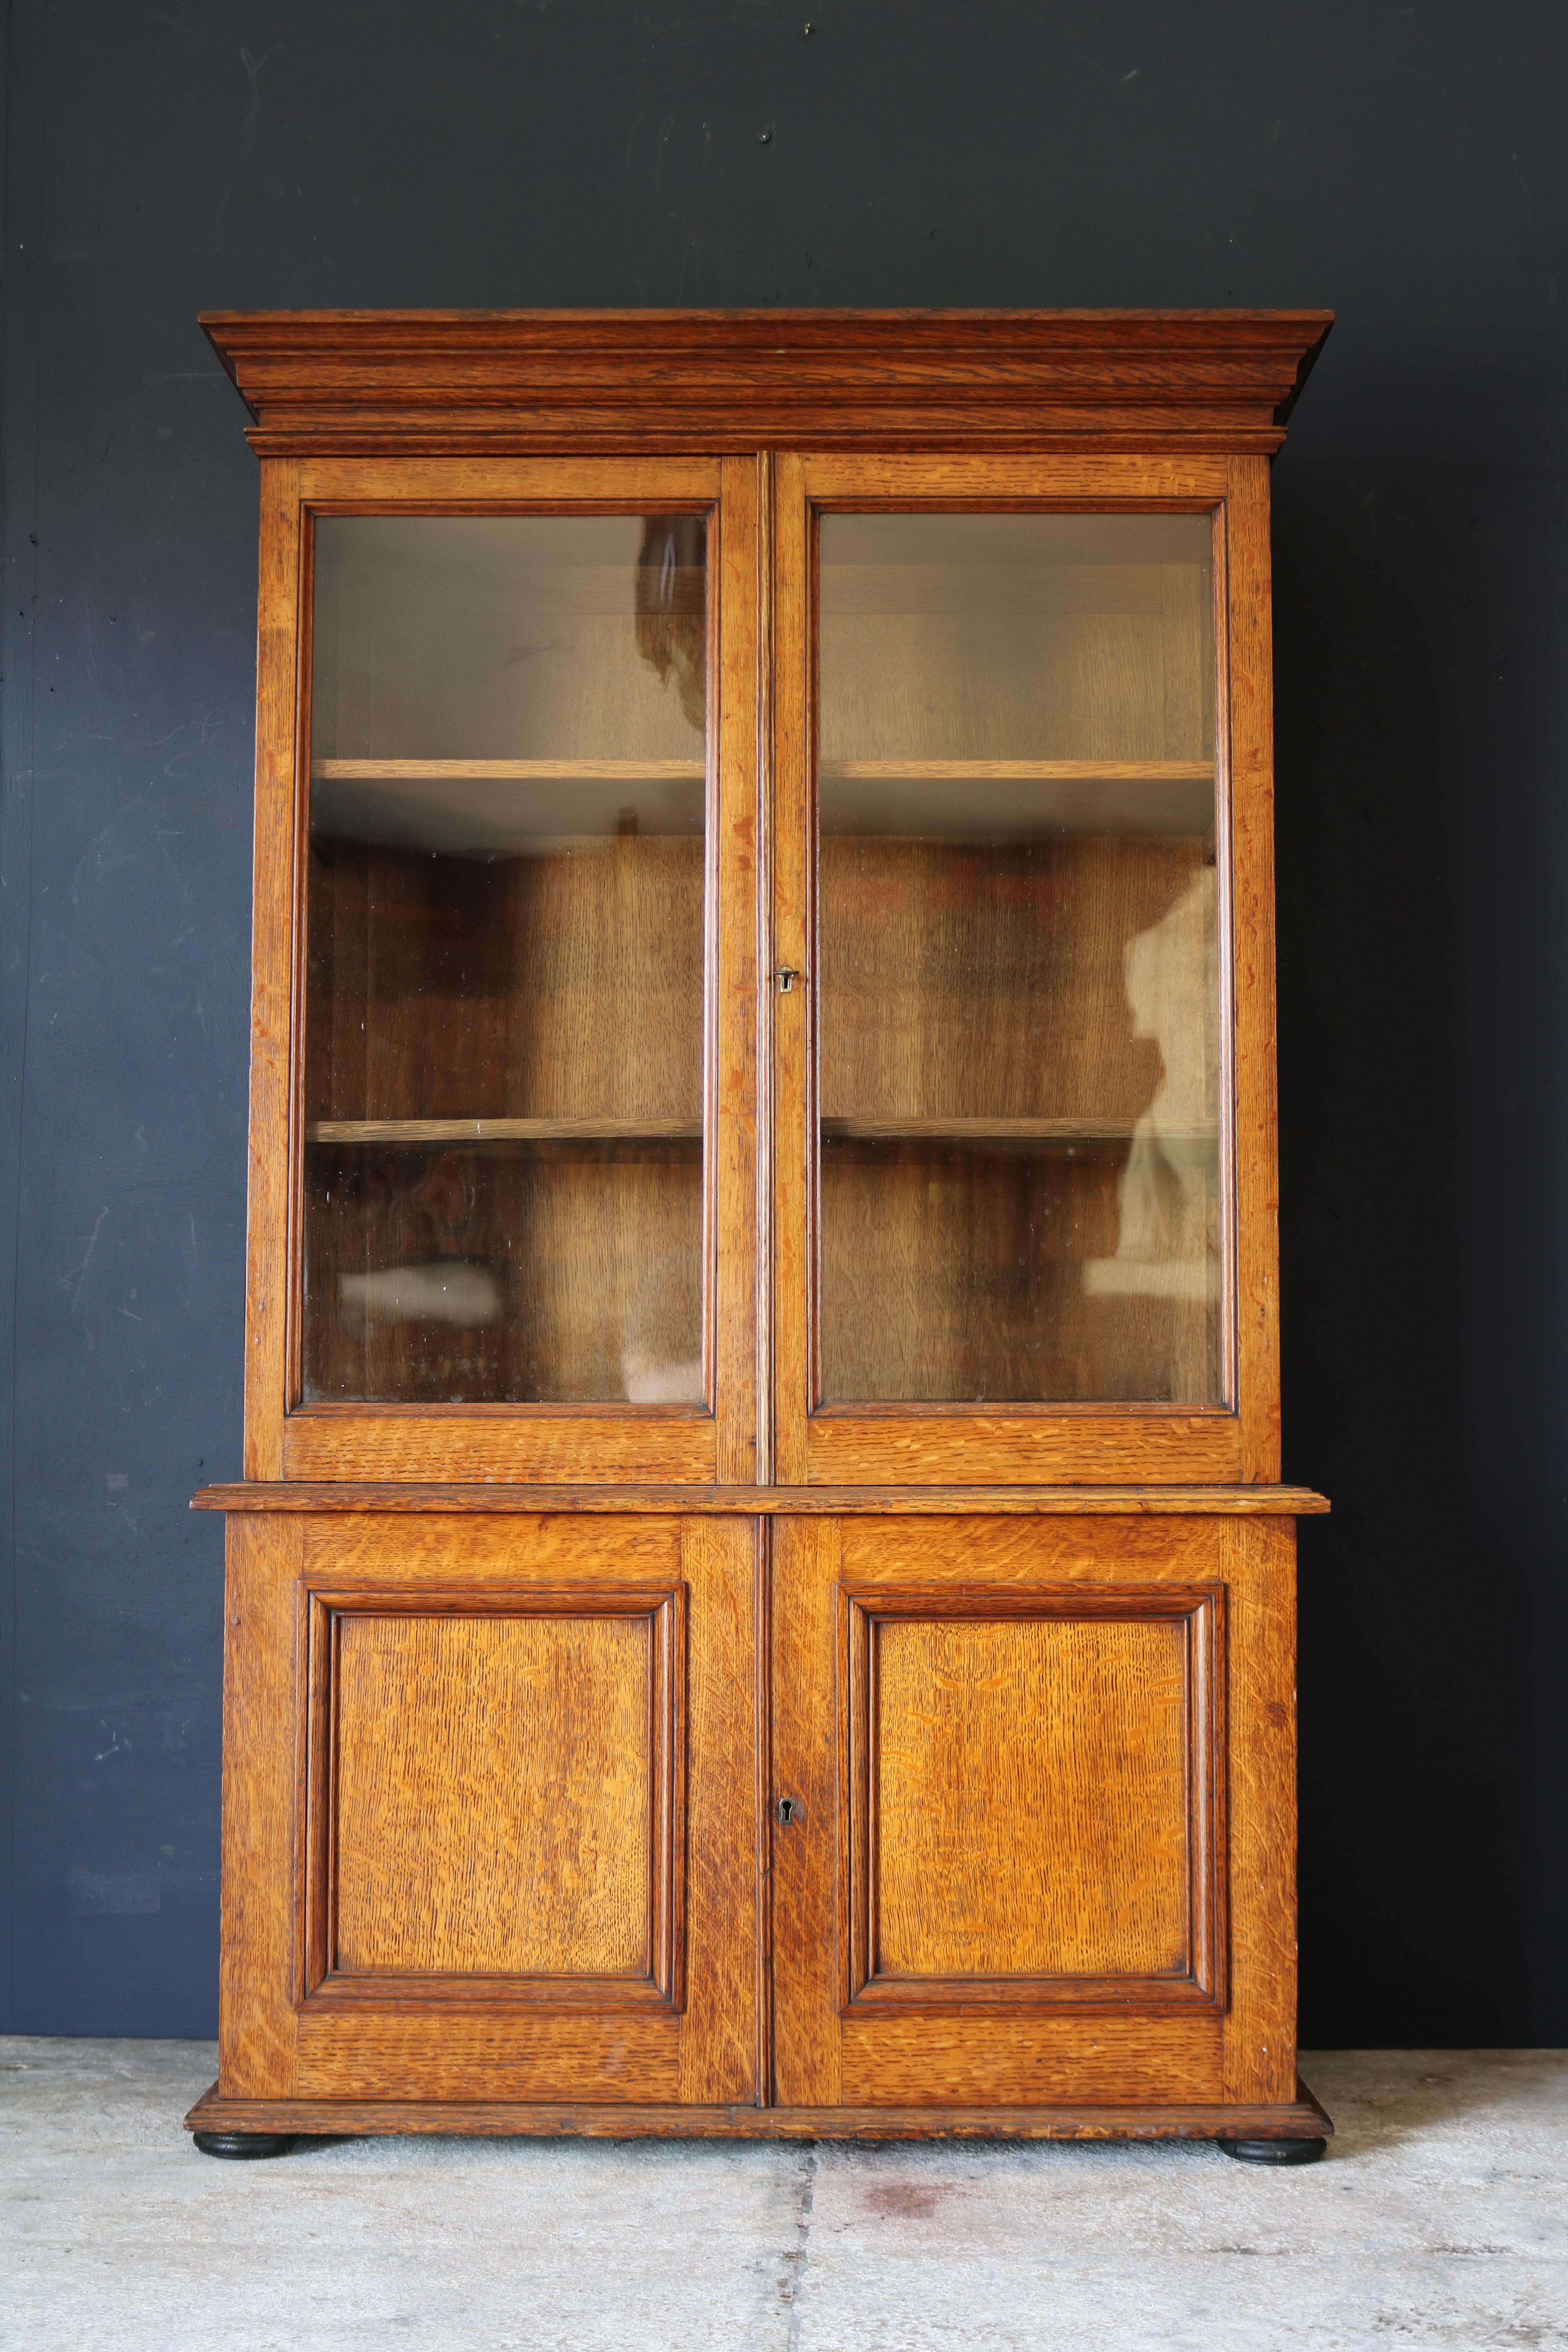 A rare 19th century English dwarf bookcase made from best quality golden oak, the proportions and scale of the bookcase are fantastic and most would be forgiven for thinking it’s a normal sized bookcase, circa 1880, with adjustable book shelves and